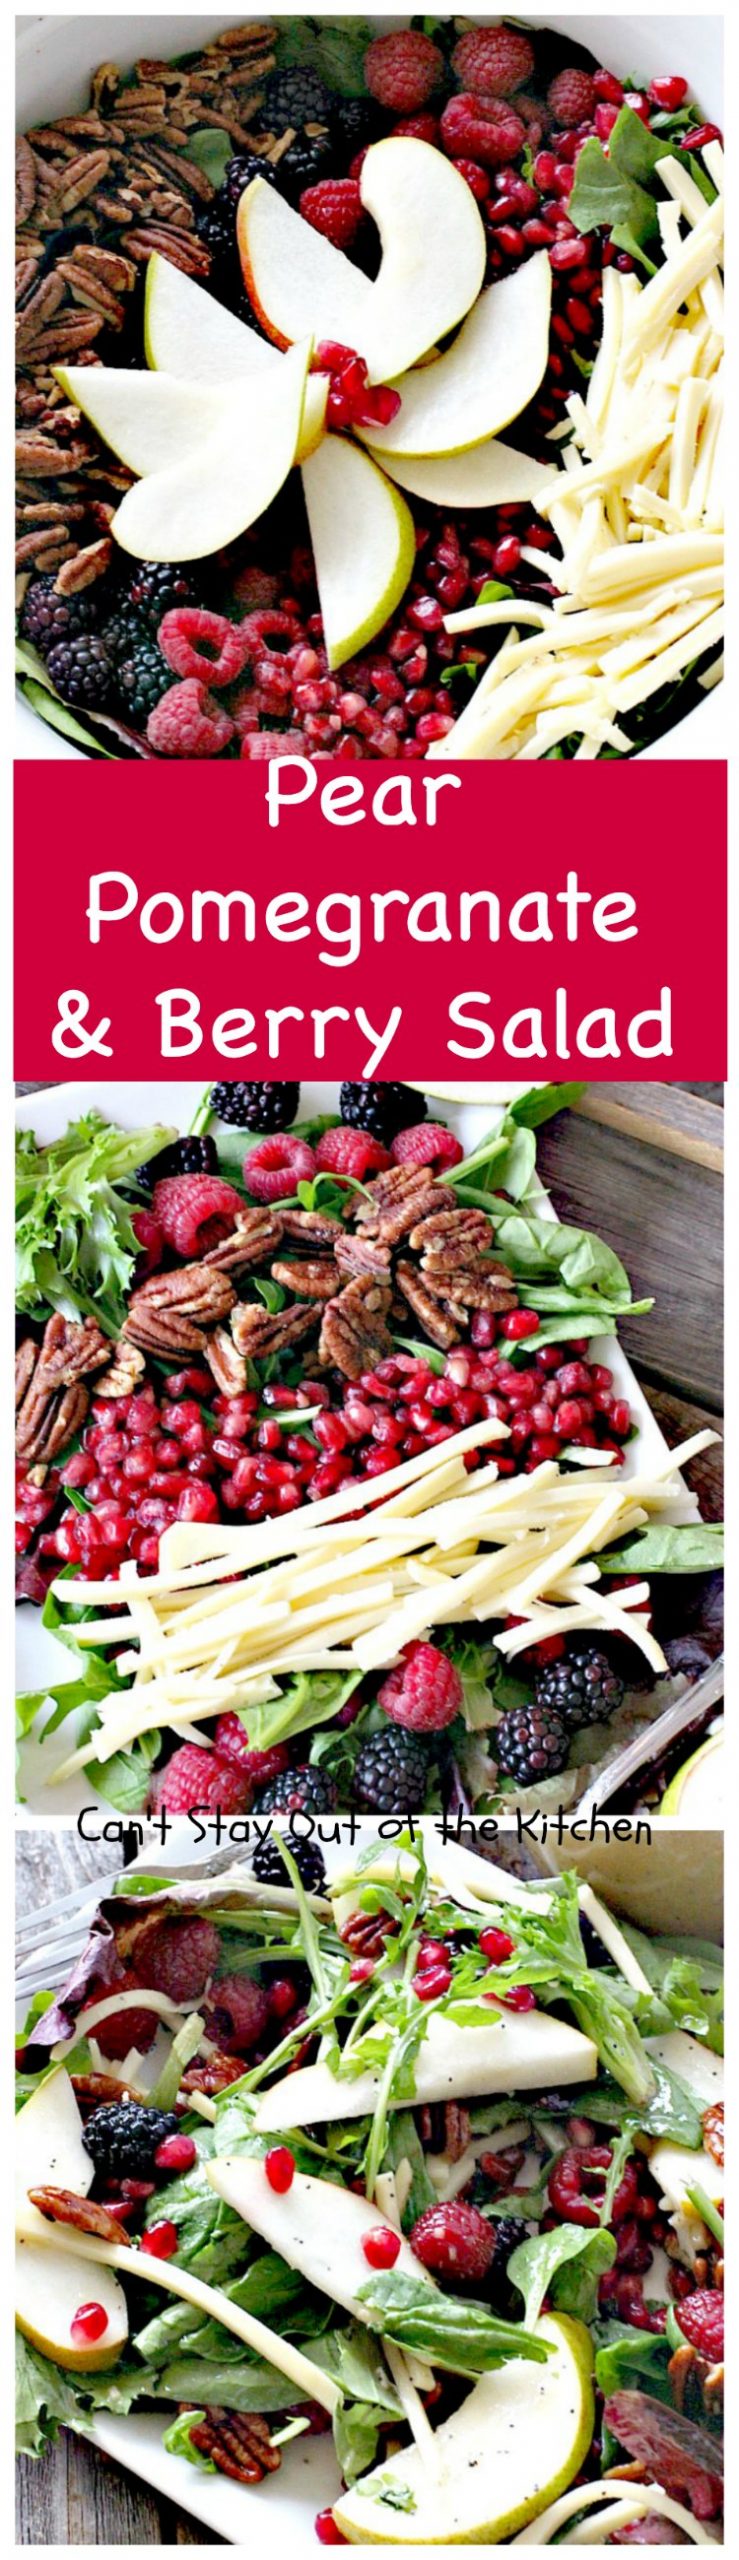 Pear, Pomegranate and Berry Salad | Can't Stay Out of the Kitchen